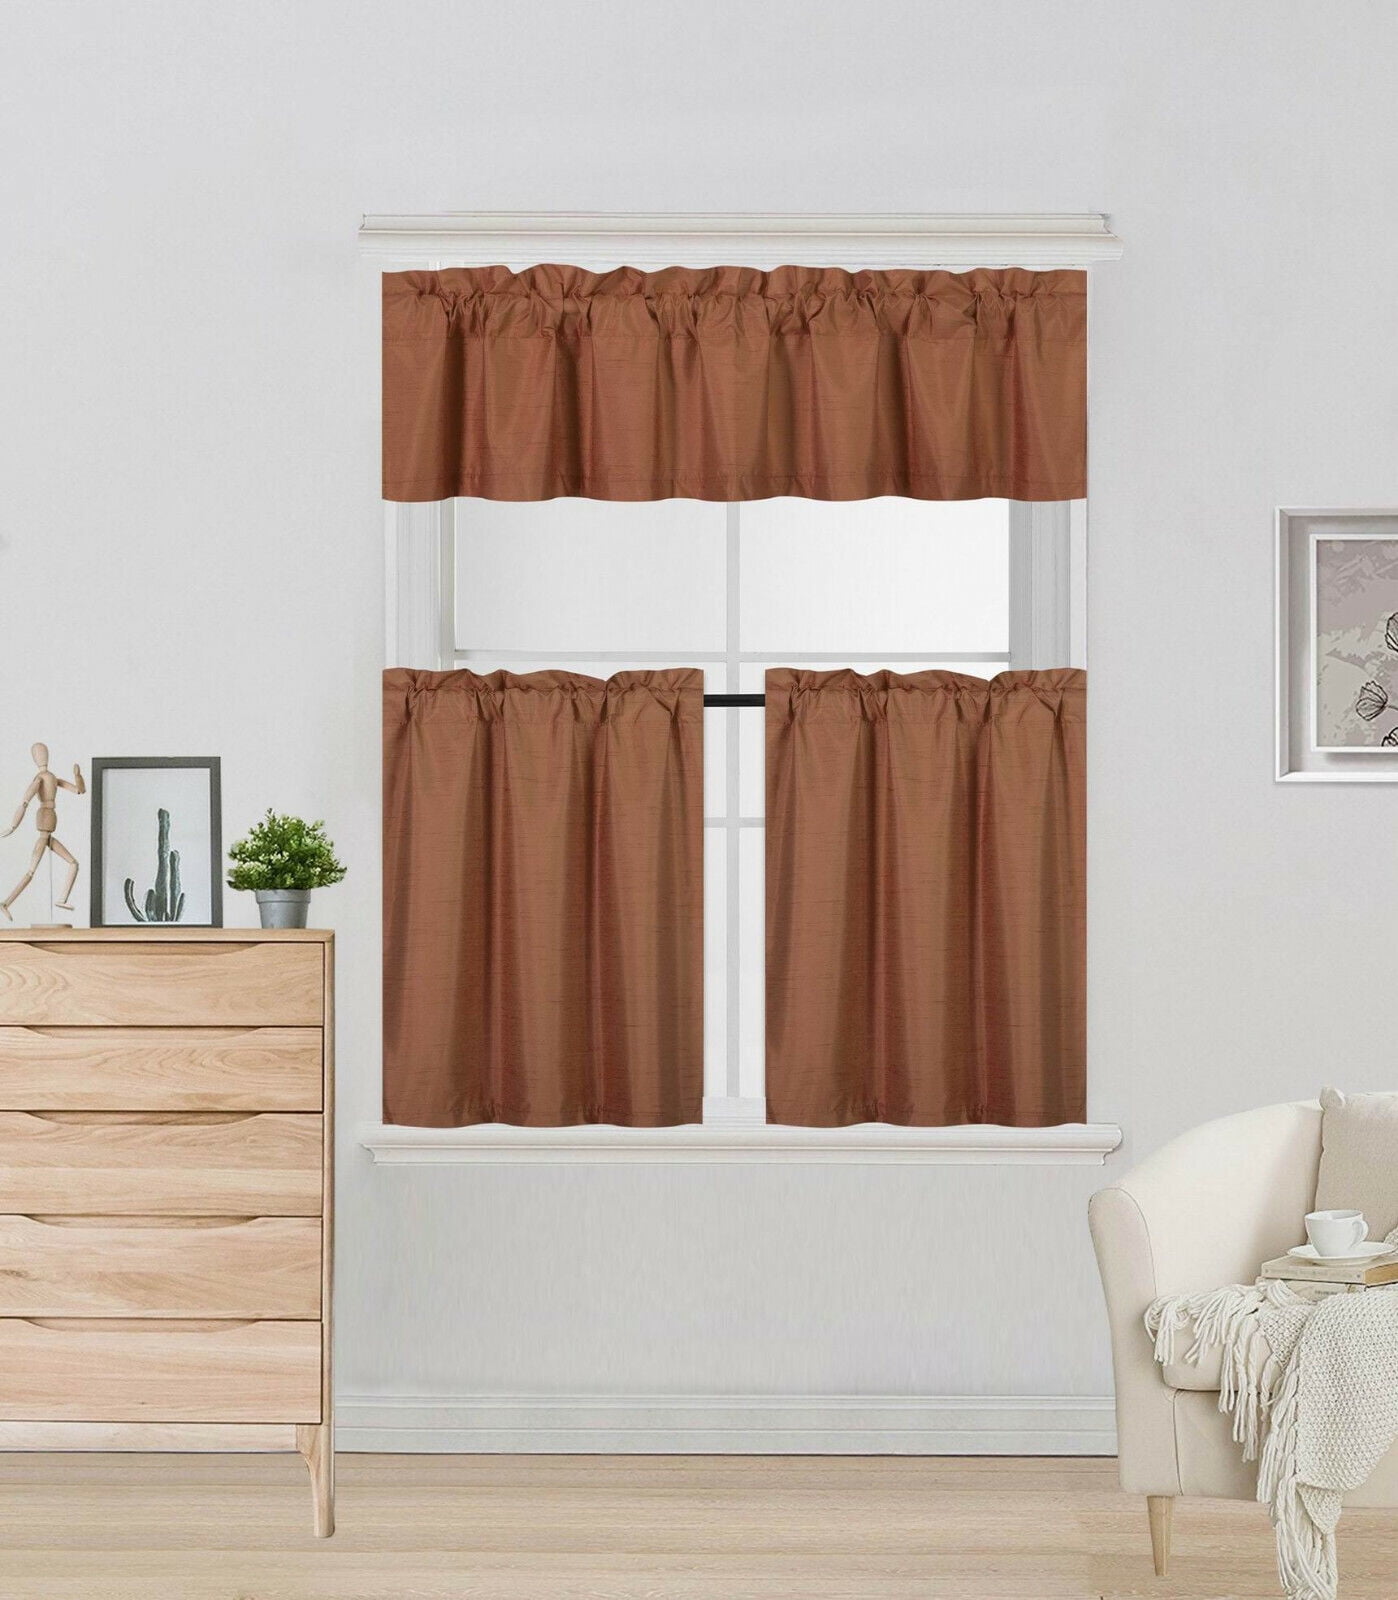 Luxury 3 piece Kitchen Curtain Brick Color K4 Includes 1 Valance and 2 ...